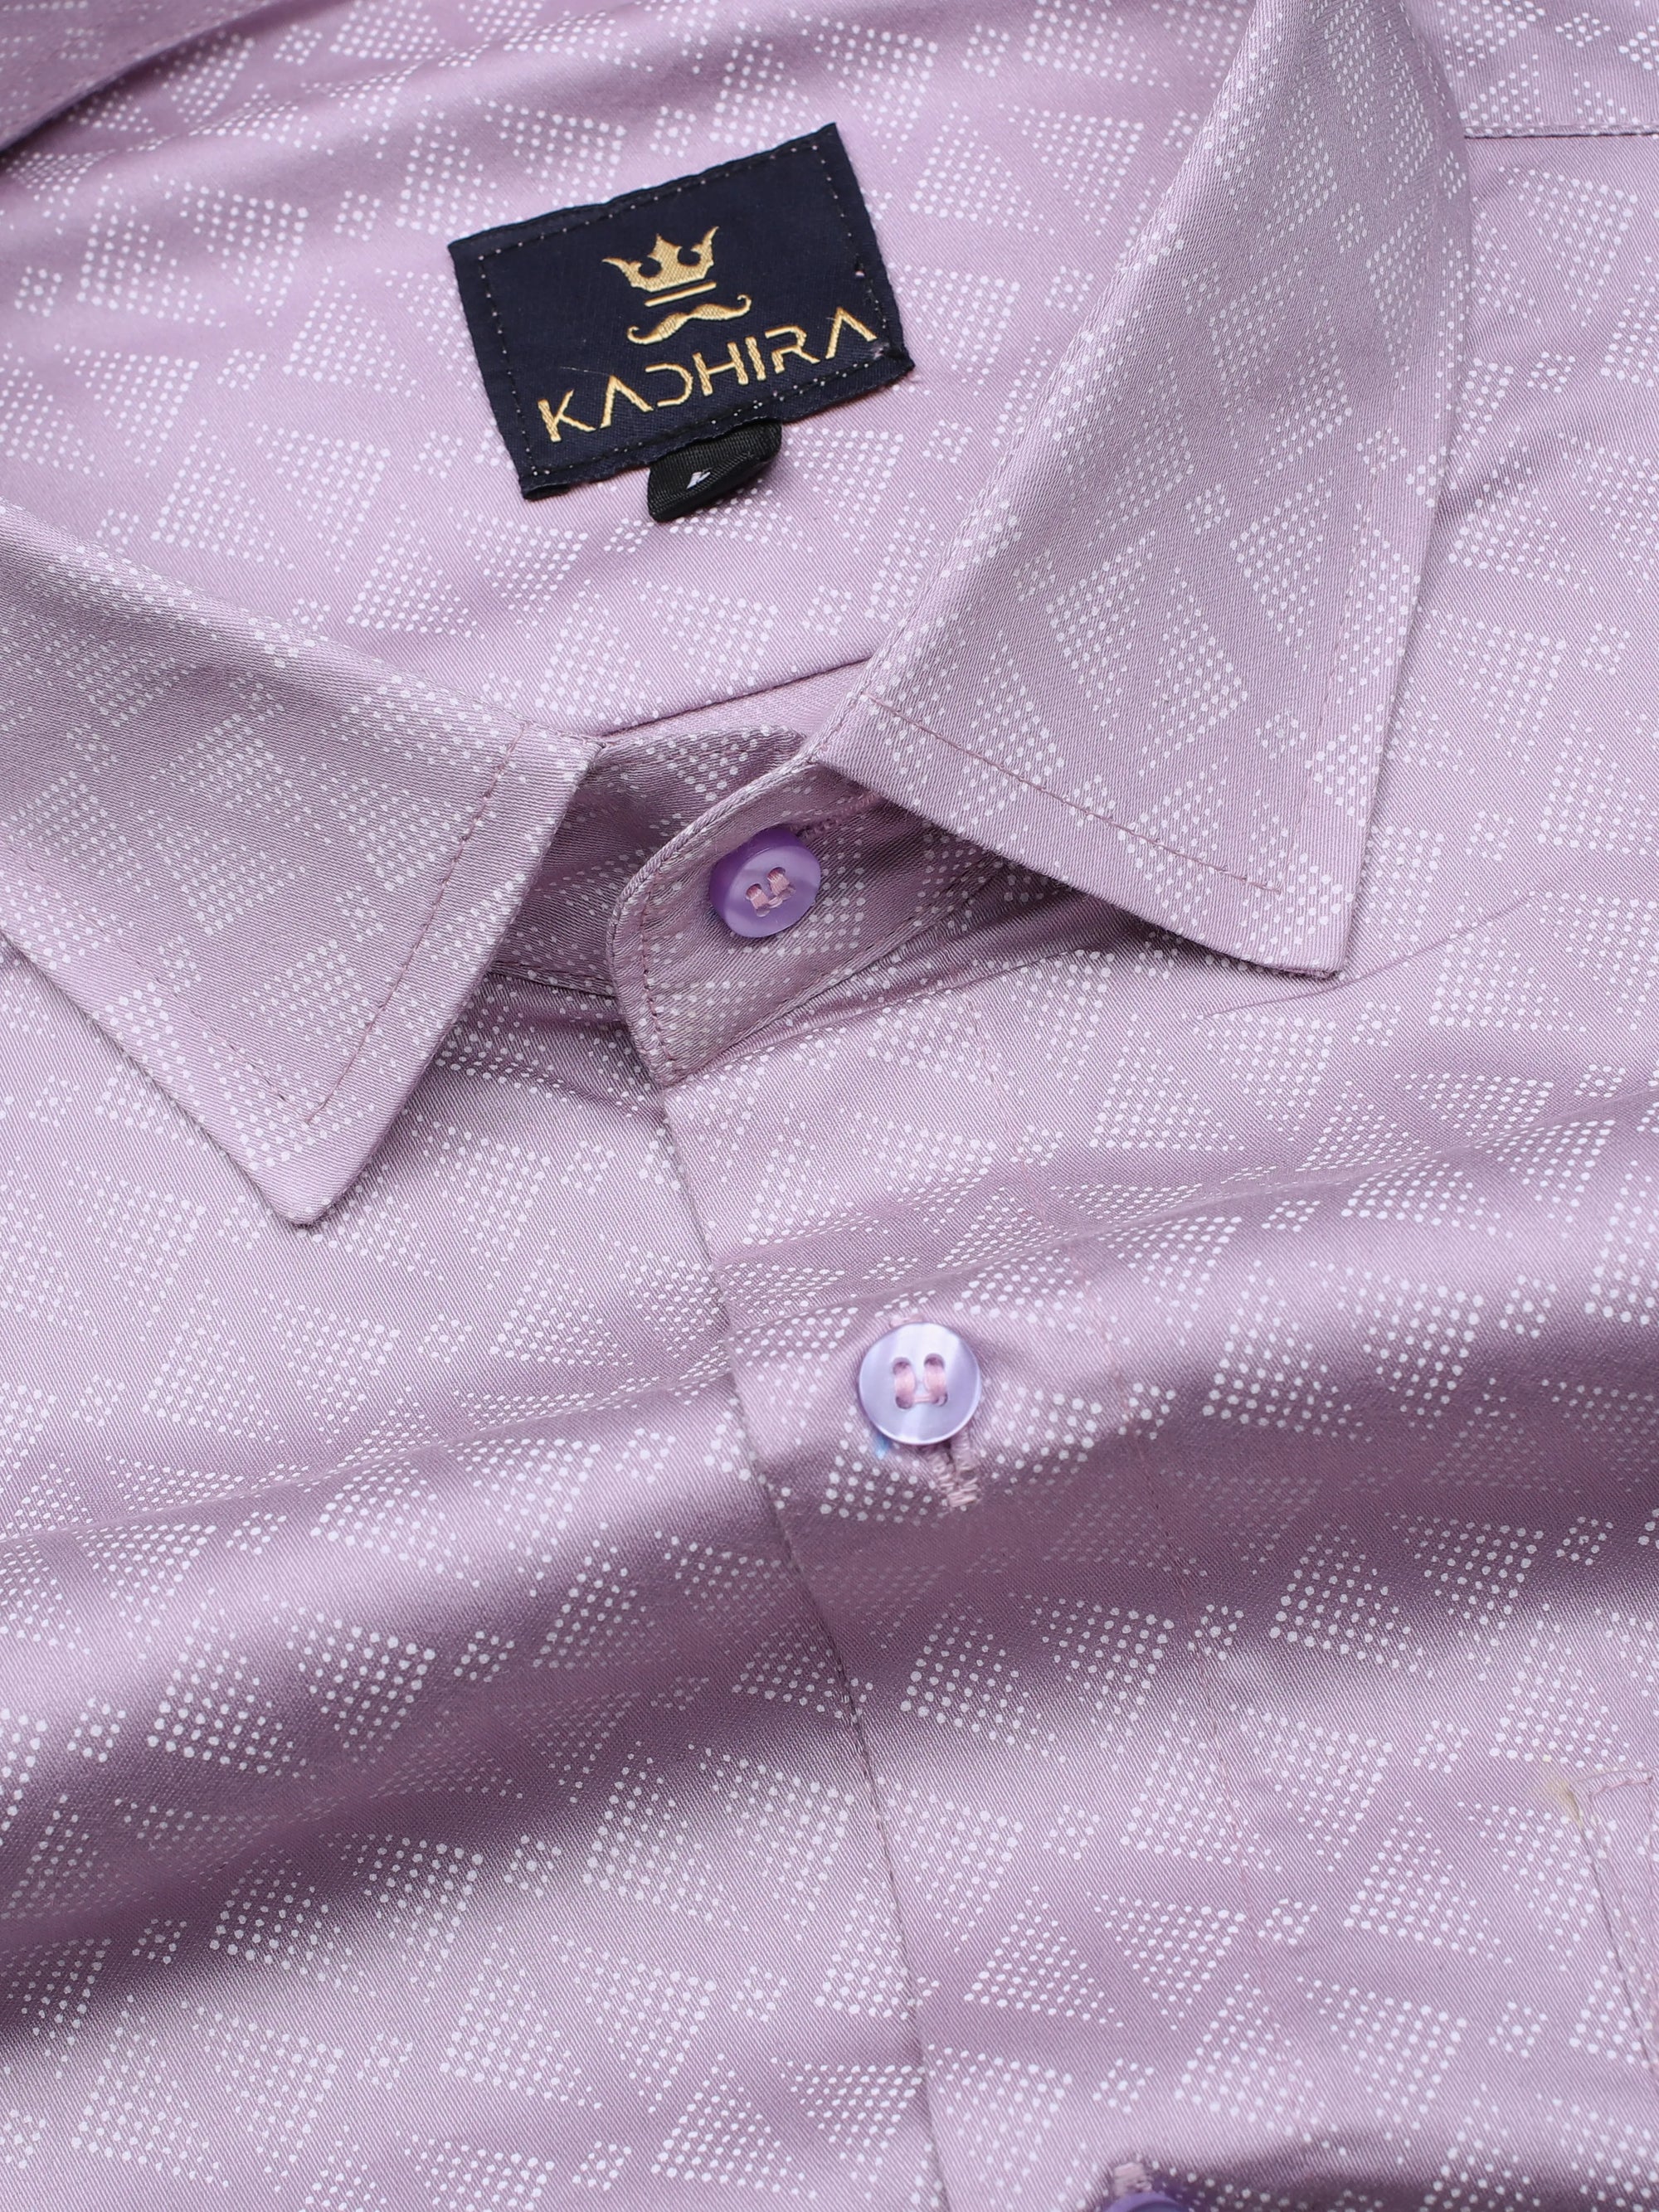 Light Chinese Violet Dotted Triangle Pattern Super Premium Cotton Shirt-[ON SALE]